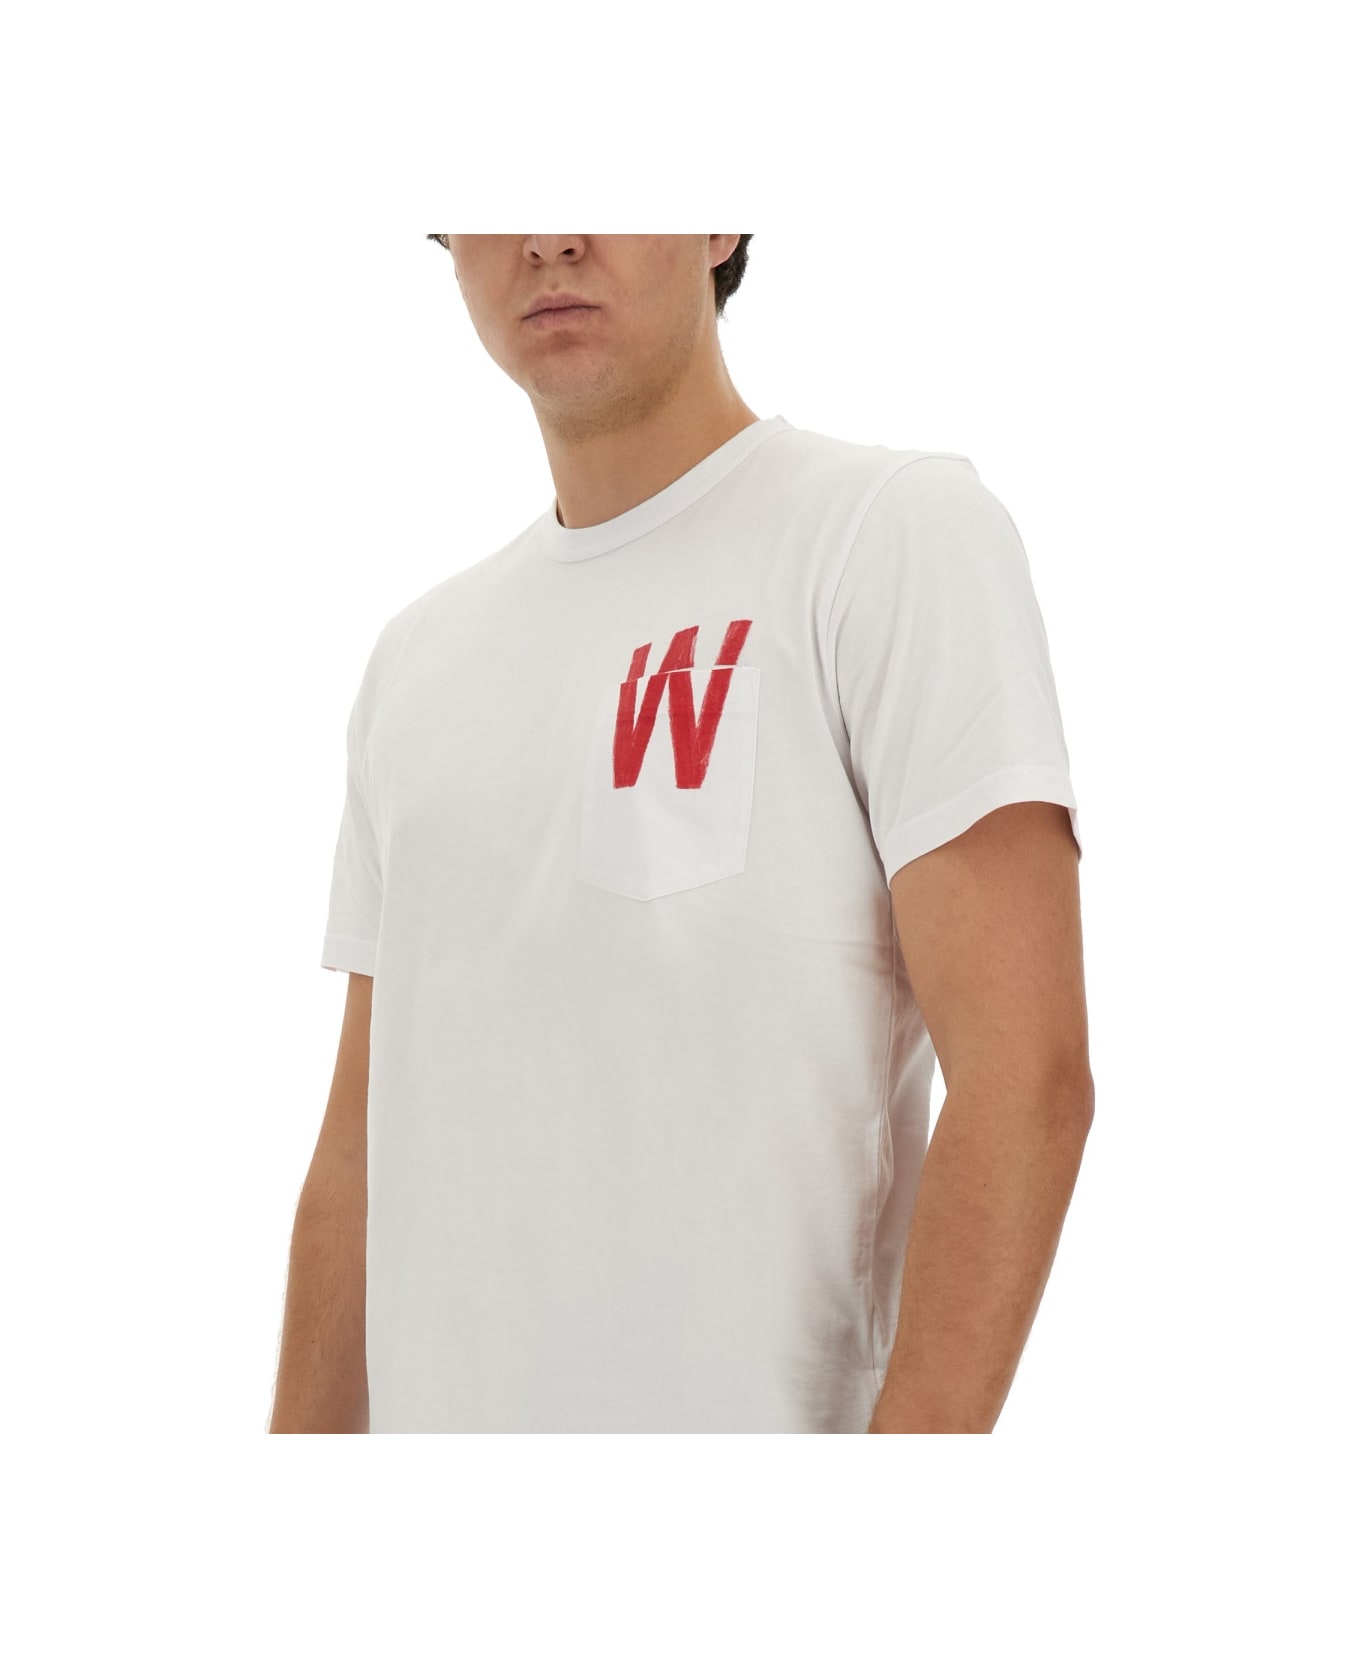 Woolrich T-shirt With Logo - WHITE